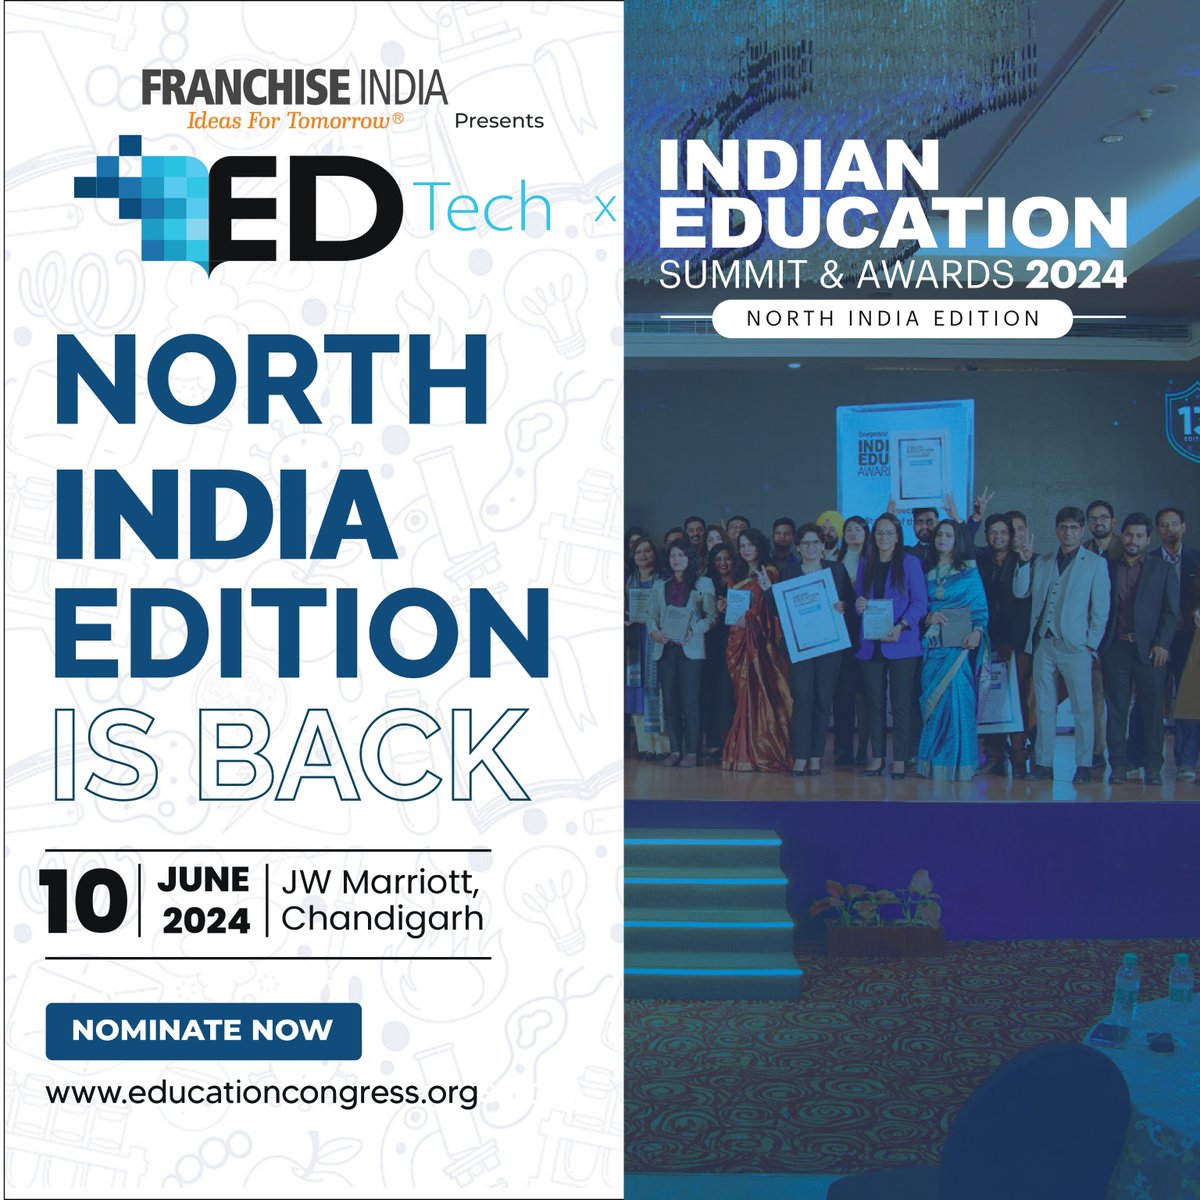 🤩The Edtech x Indian Education Awards 2024 are coming to Chandigarh on June 10th. 🏆Nominate now to recognize the pioneers of Indian education!✨

#EdtechAwards2024 #IndianEducation #ChandigarhEvents #FutureOfEducation #EducationInnovation #EducationTech #Franchiseindia